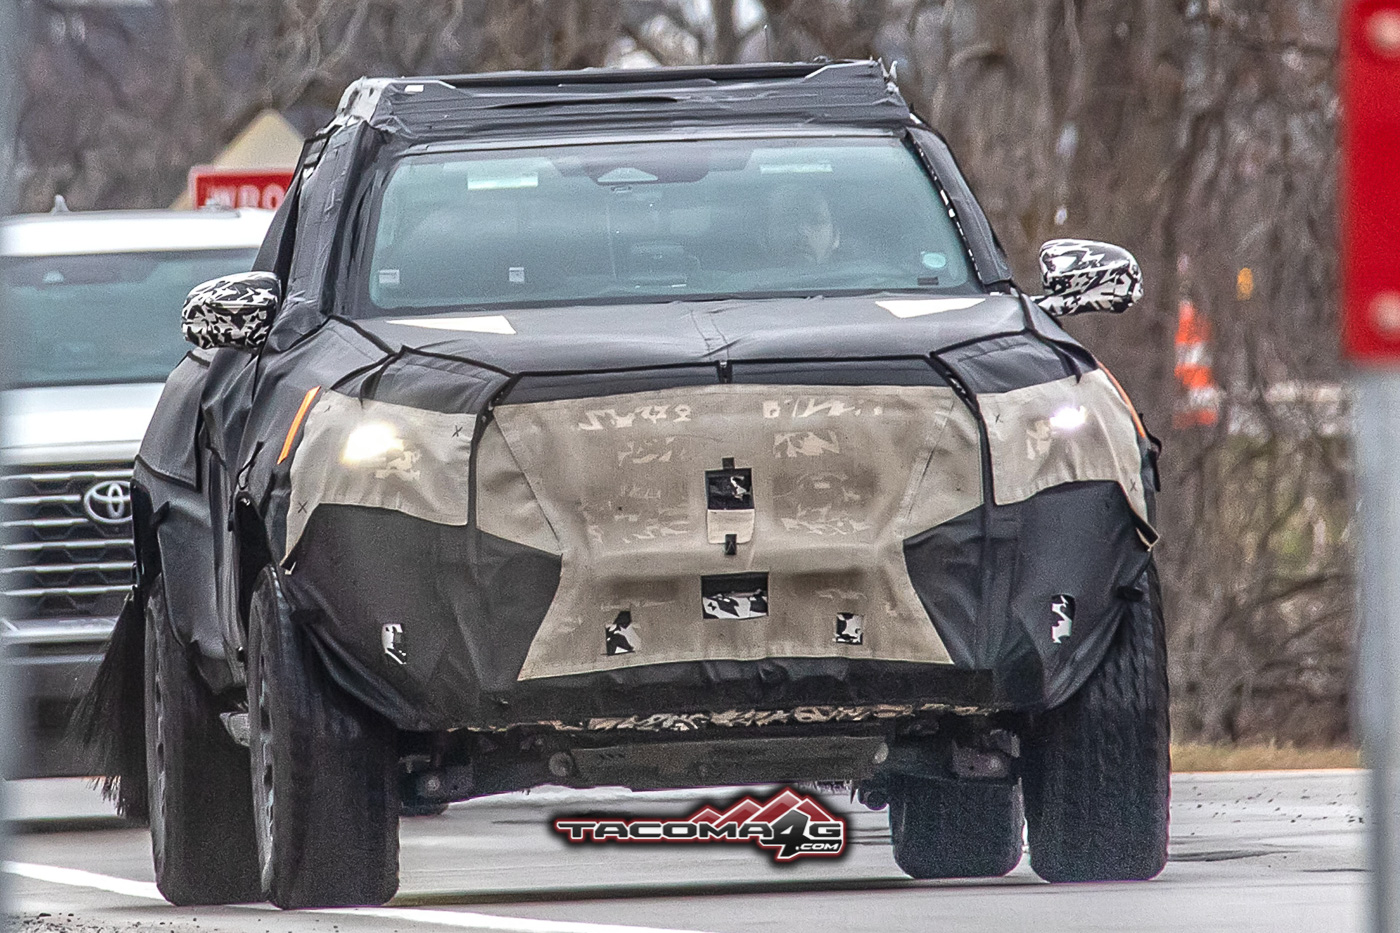 2024 Tacoma Spied: 2024 Toyota Tacoma TRD Pro / Trailhunter Prototype 1st Sighting Reveals Rugged Off-Road Details + Rear Disc Brakes 📸 2024-toyota-tacoma-trd-pro-prototype-1